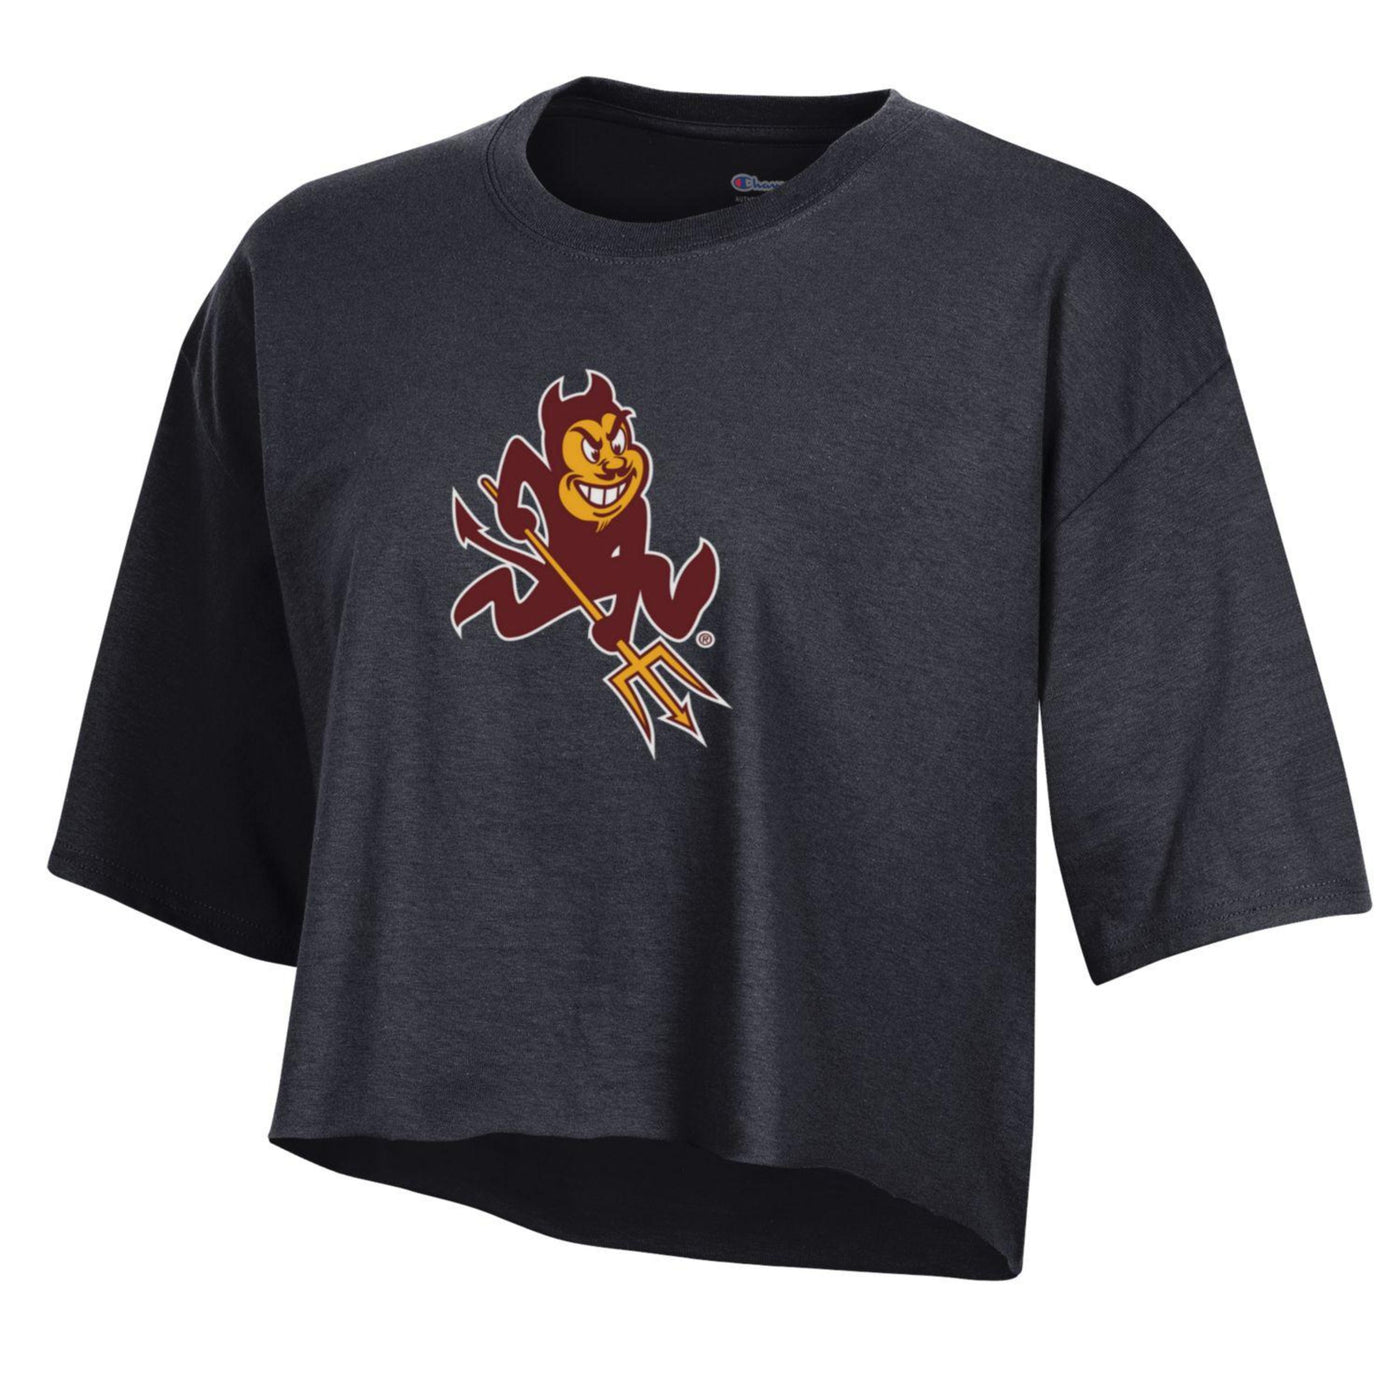 ASU black cropped  tee with sparky logo  on the chest. 